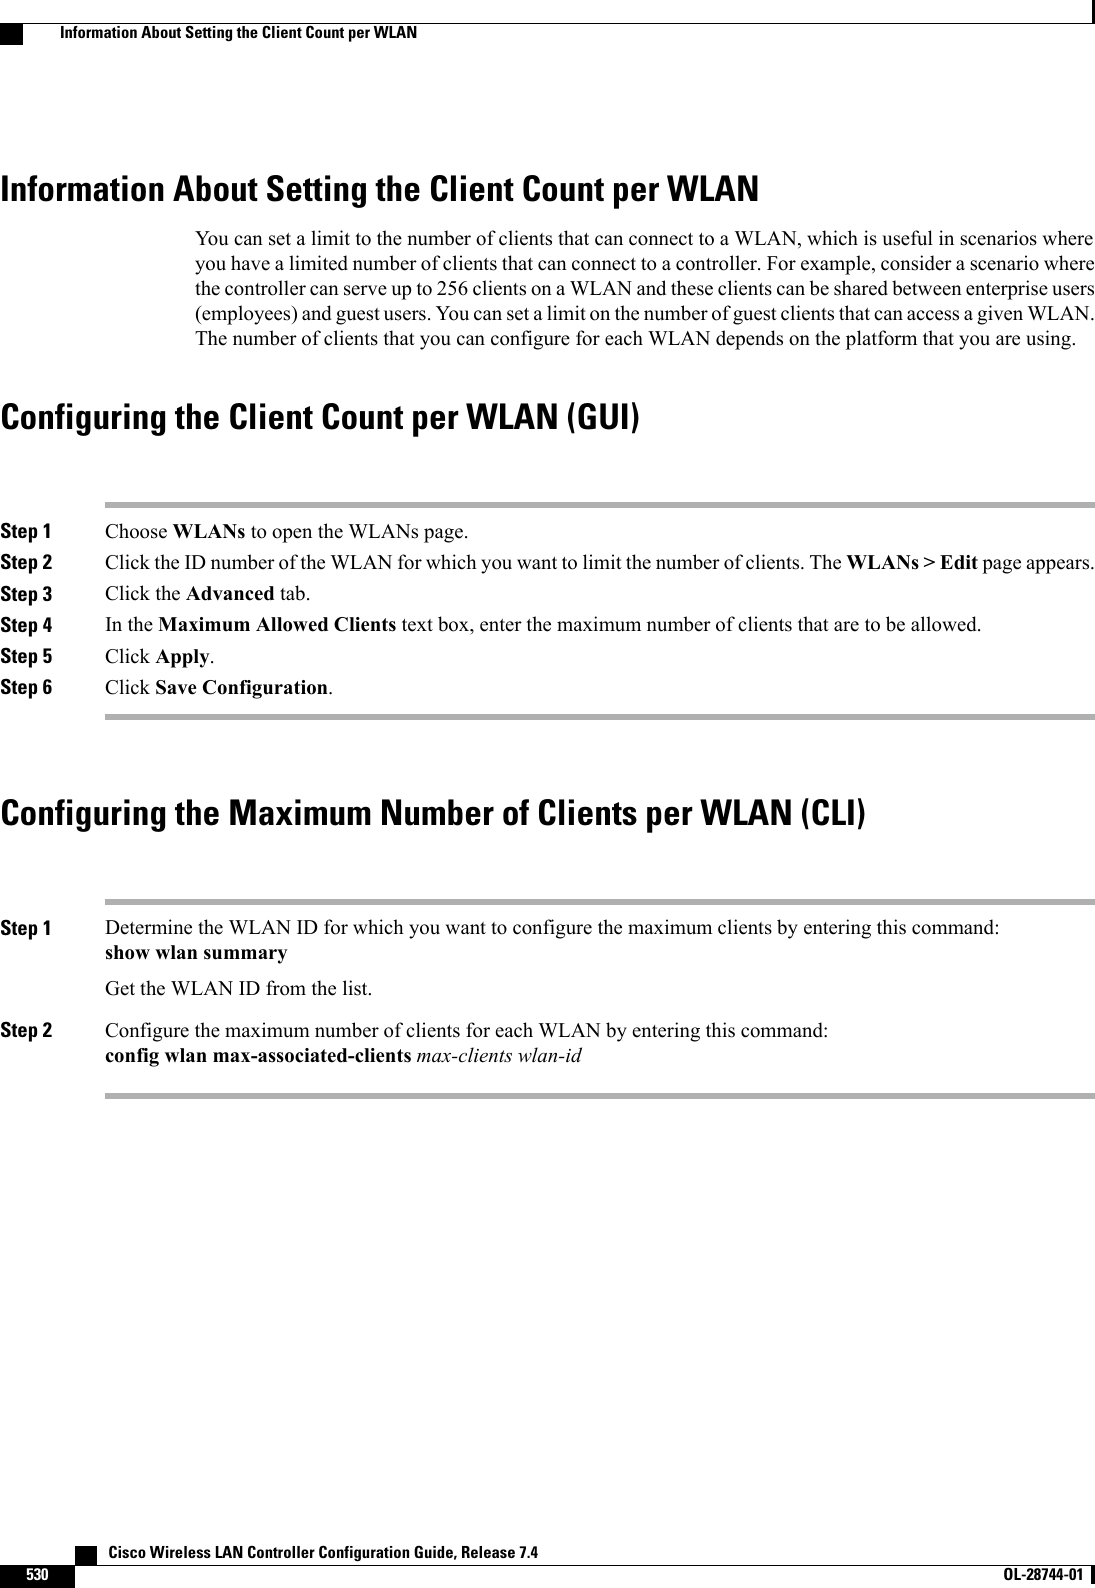 Information About Setting the Client Count per WLANYou can set a limit to the number of clients that can connect to a WLAN, which is useful in scenarios whereyou have a limited number of clients that can connect to a controller. For example, consider a scenario wherethe controller can serve up to 256 clients on a WLAN and these clients can be shared between enterprise users(employees) and guest users. You can set a limit on the number of guest clients that can access a given WLAN.The number of clients that you can configure for each WLAN depends on the platform that you are using.Configuring the Client Count per WLAN (GUI)Step 1 Choose WLANs to open the WLANs page.Step 2 Click the ID number of the WLAN for which you want to limit the number of clients. The WLANs &gt; Edit page appears.Step 3 Click the Advanced tab.Step 4 In the Maximum Allowed Clients text box, enter the maximum number of clients that are to be allowed.Step 5 Click Apply.Step 6 Click Save Configuration.Configuring the Maximum Number of Clients per WLAN (CLI)Step 1 Determine the WLAN ID for which you want to configure the maximum clients by entering this command:show wlan summaryGet the WLAN ID from the list.Step 2 Configure the maximum number of clients for each WLAN by entering this command:config wlan max-associated-clients max-clients wlan-id   Cisco Wireless LAN Controller Configuration Guide, Release 7.4530 OL-28744-01  Information About Setting the Client Count per WLAN